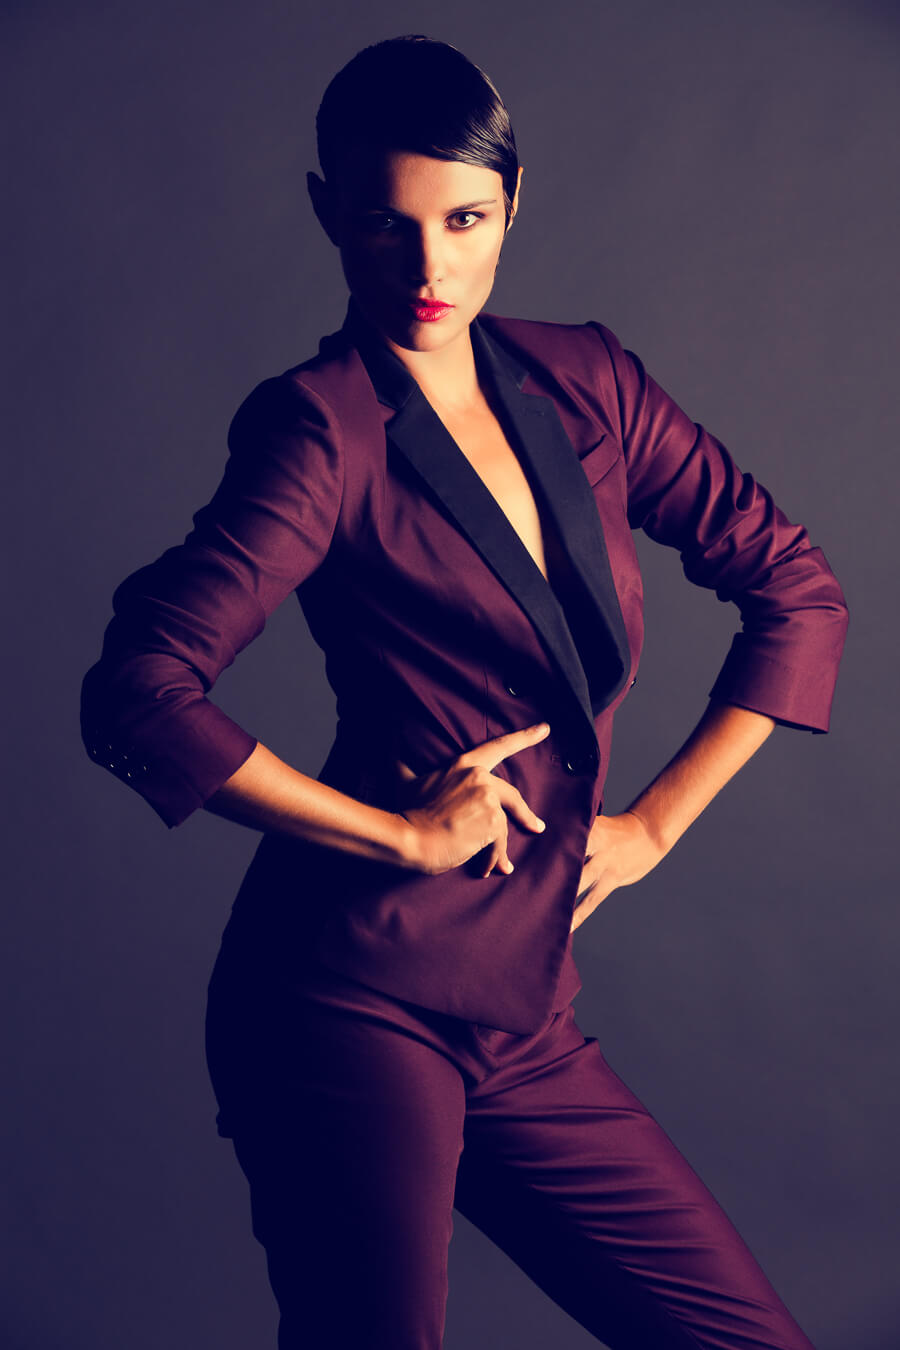 Gorgeous maroon suit with model for fashion shoot